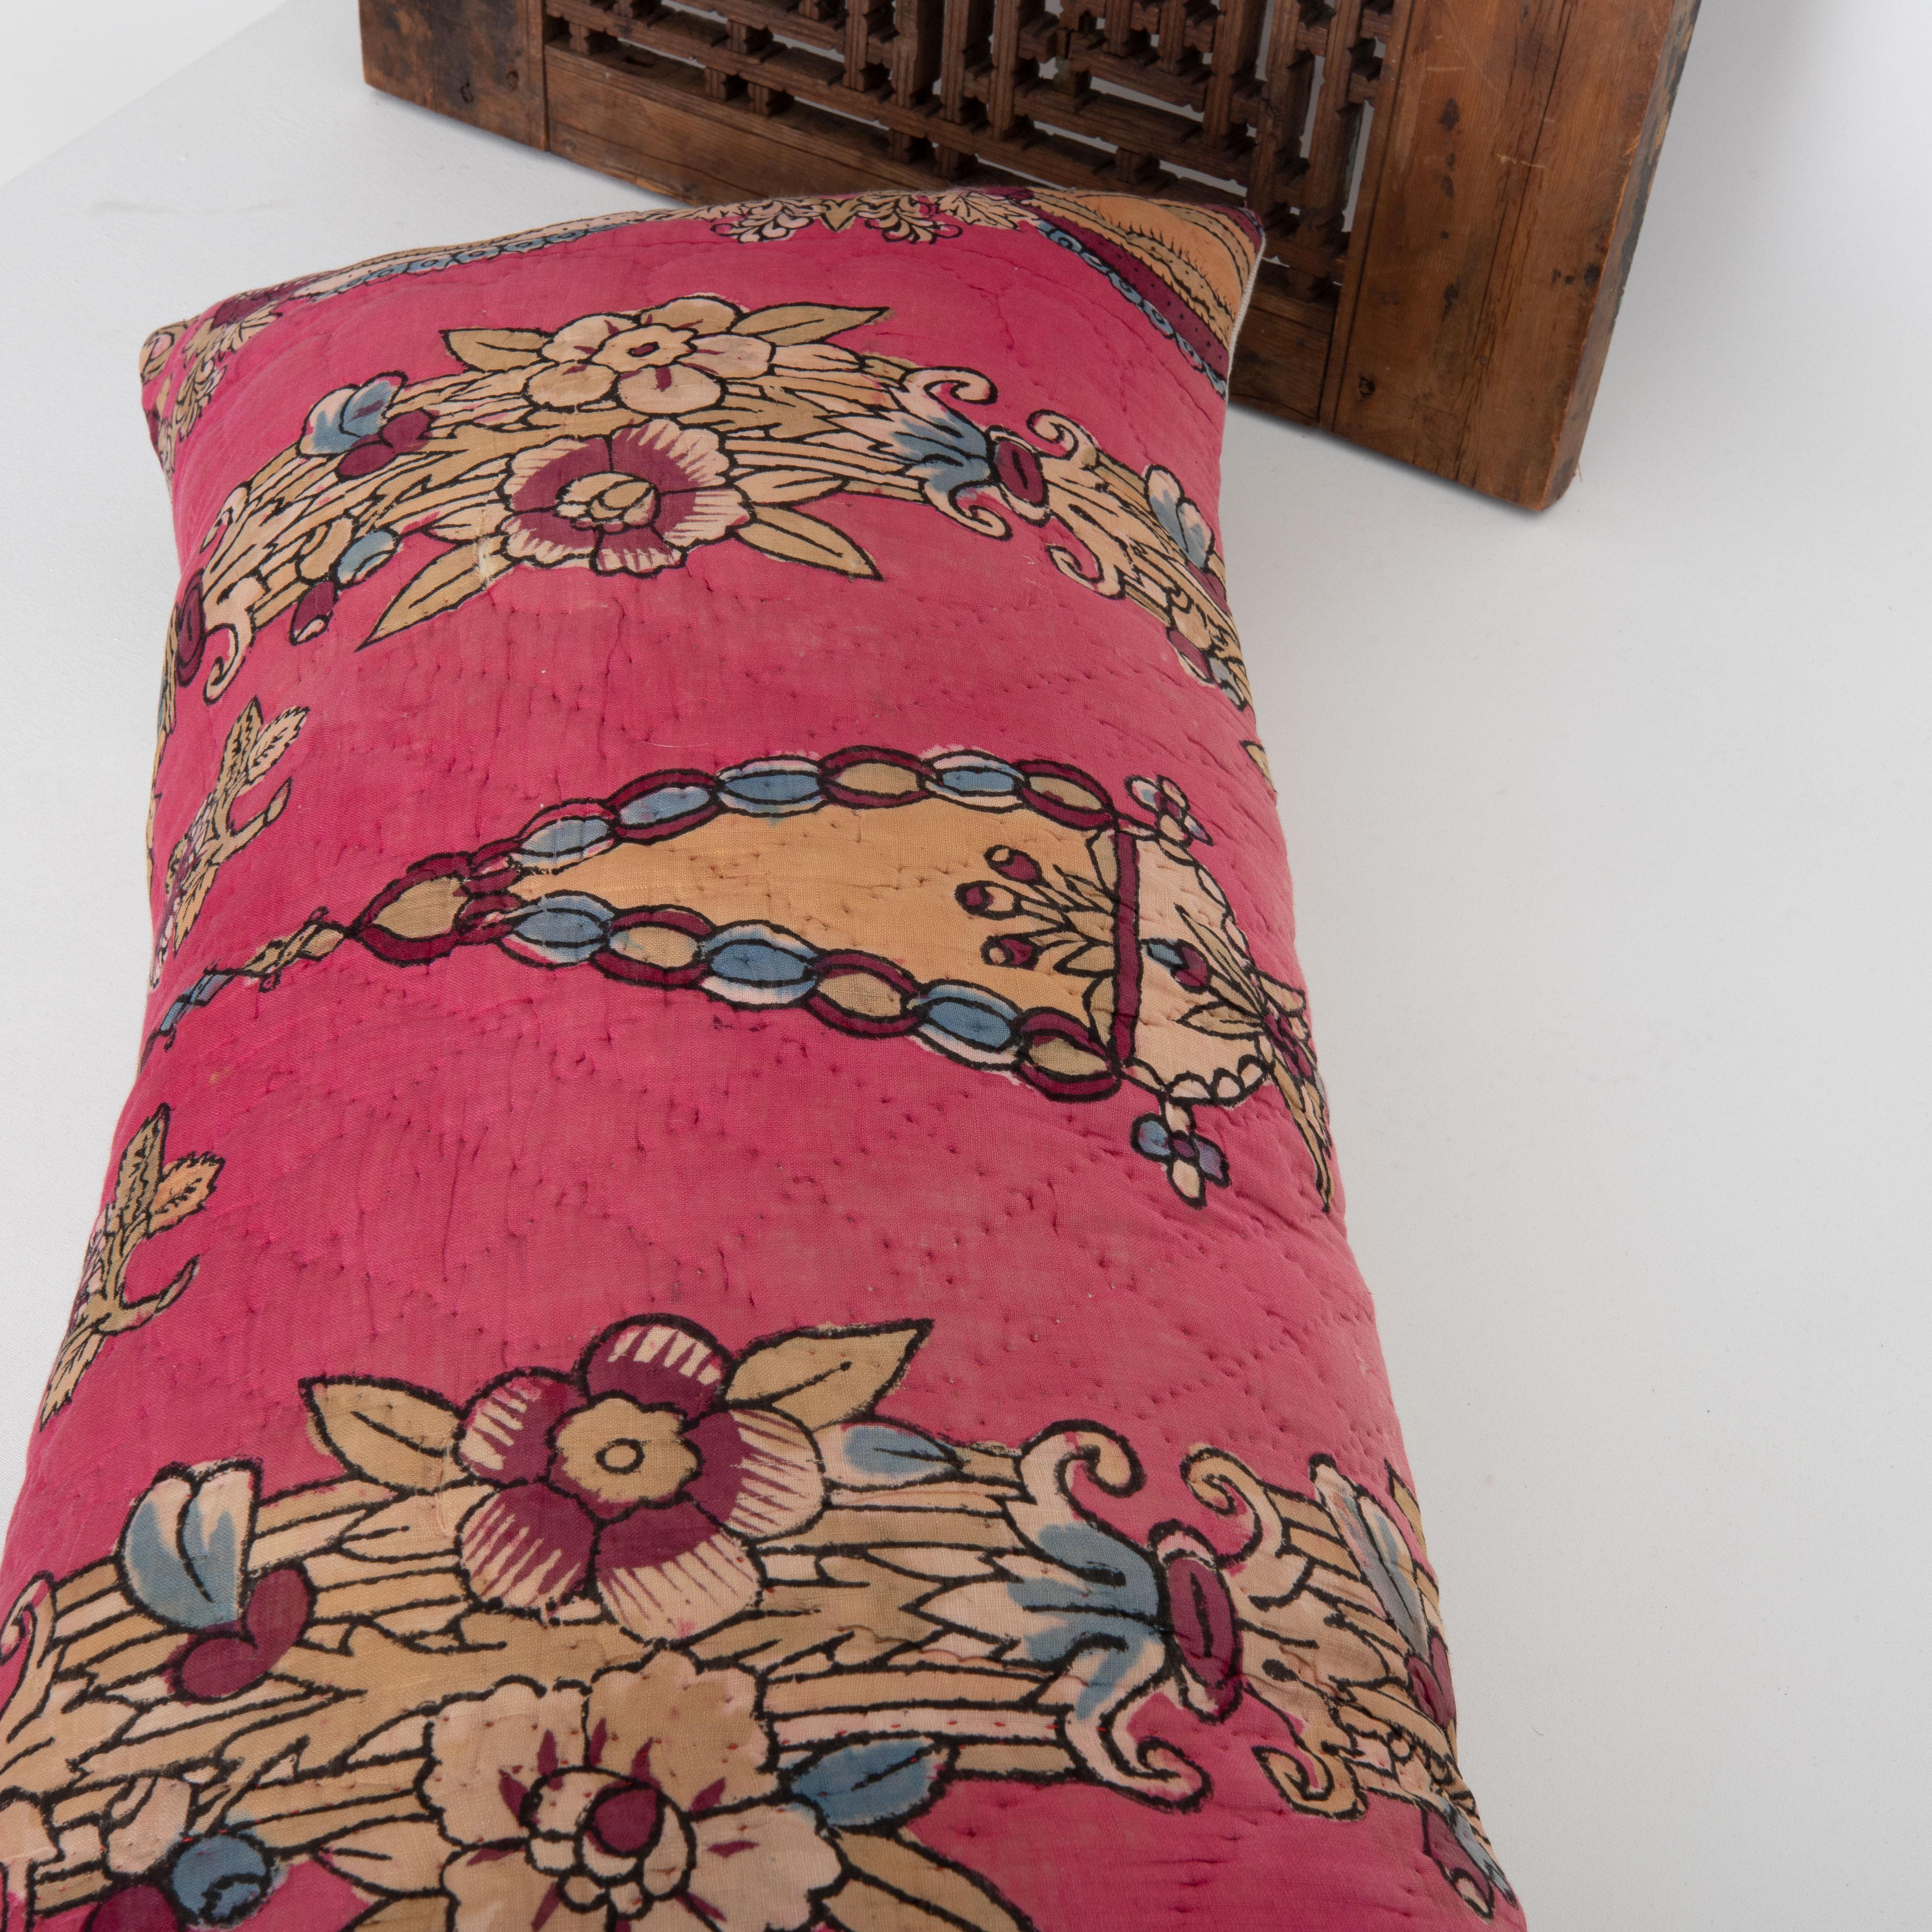 Cotton Pillow Case Made From Mid 20th C. Anatolian Quilt For Sale